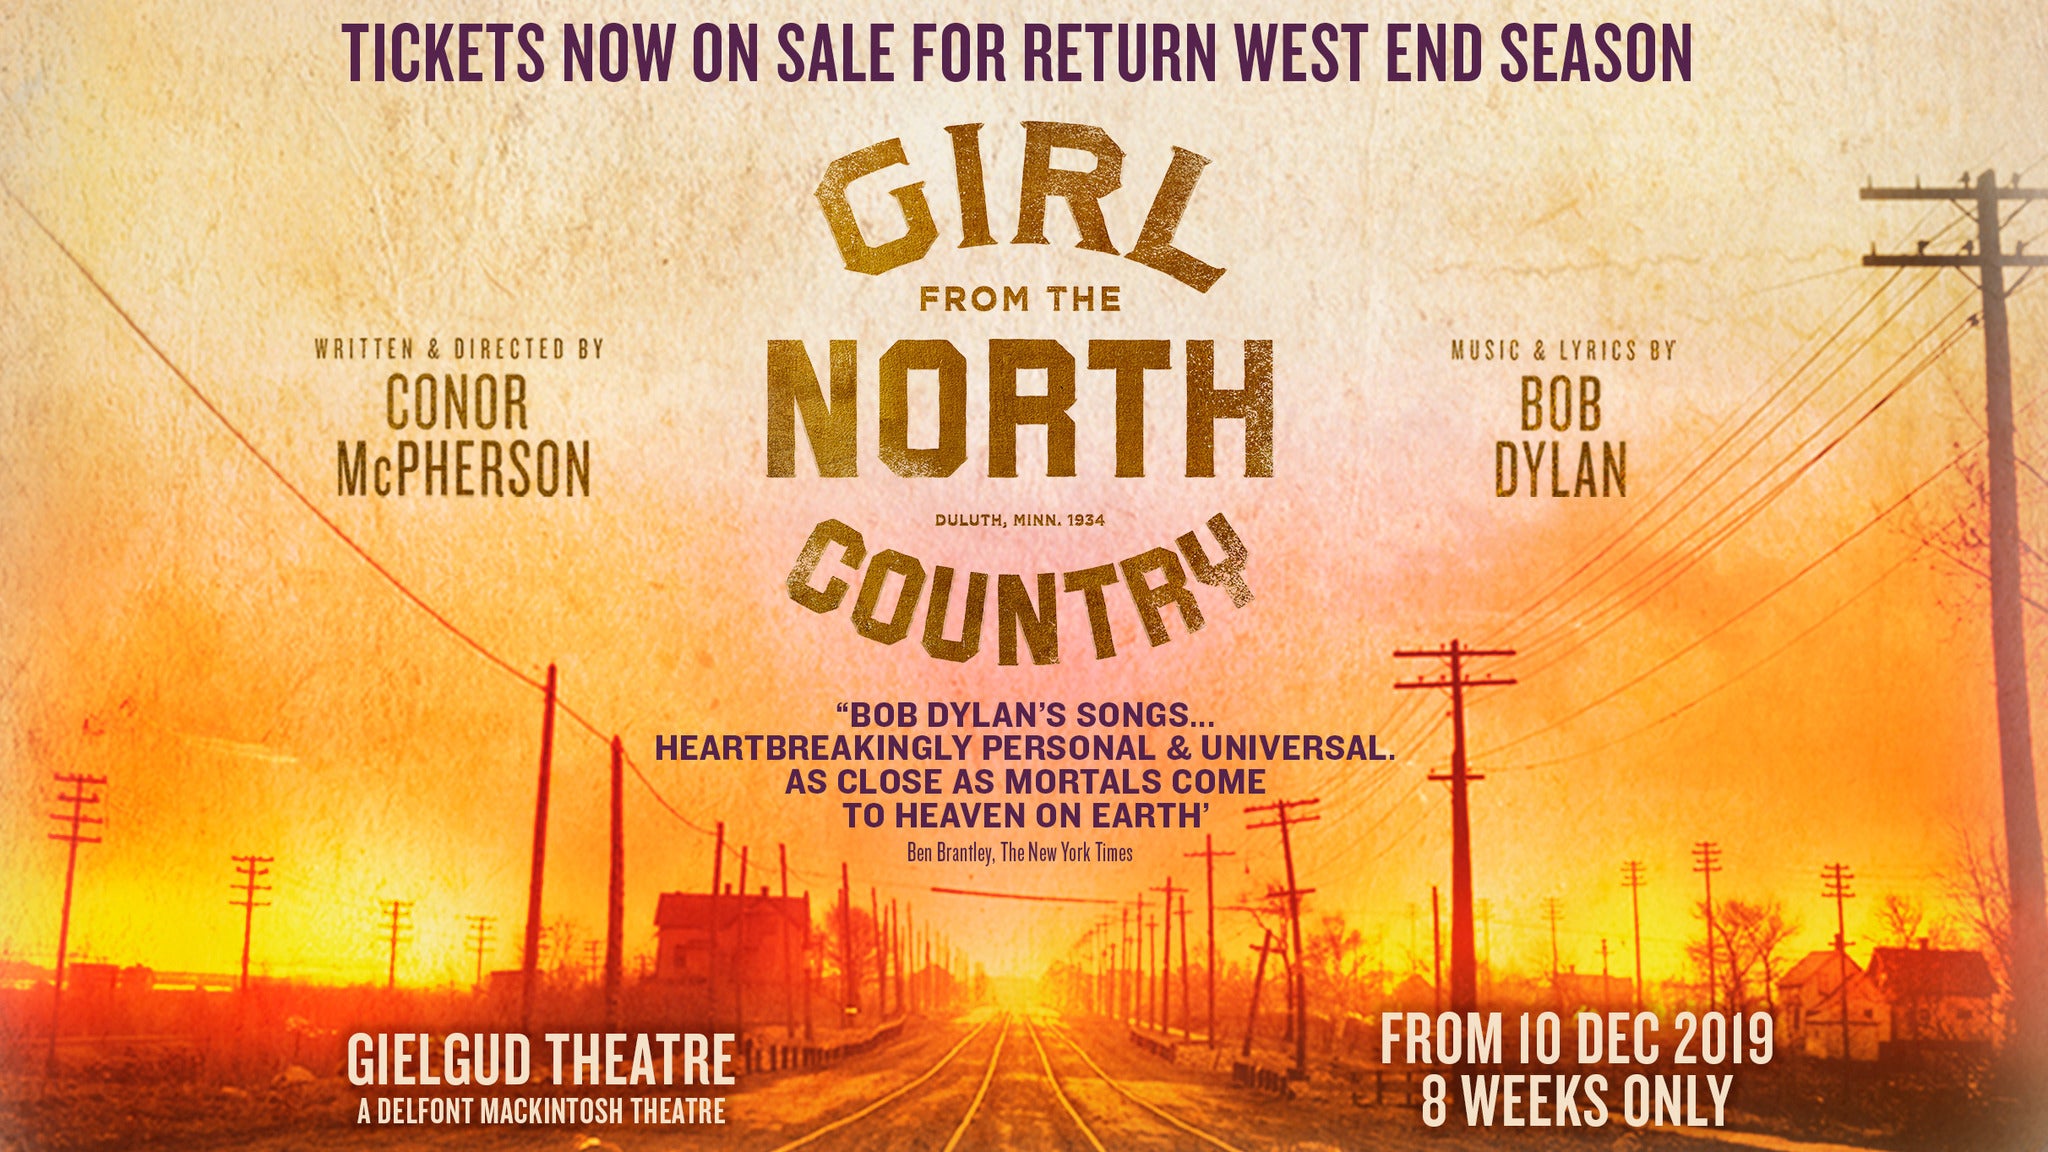 Image used with permission from Ticketmaster | Girl From The North Country tickets